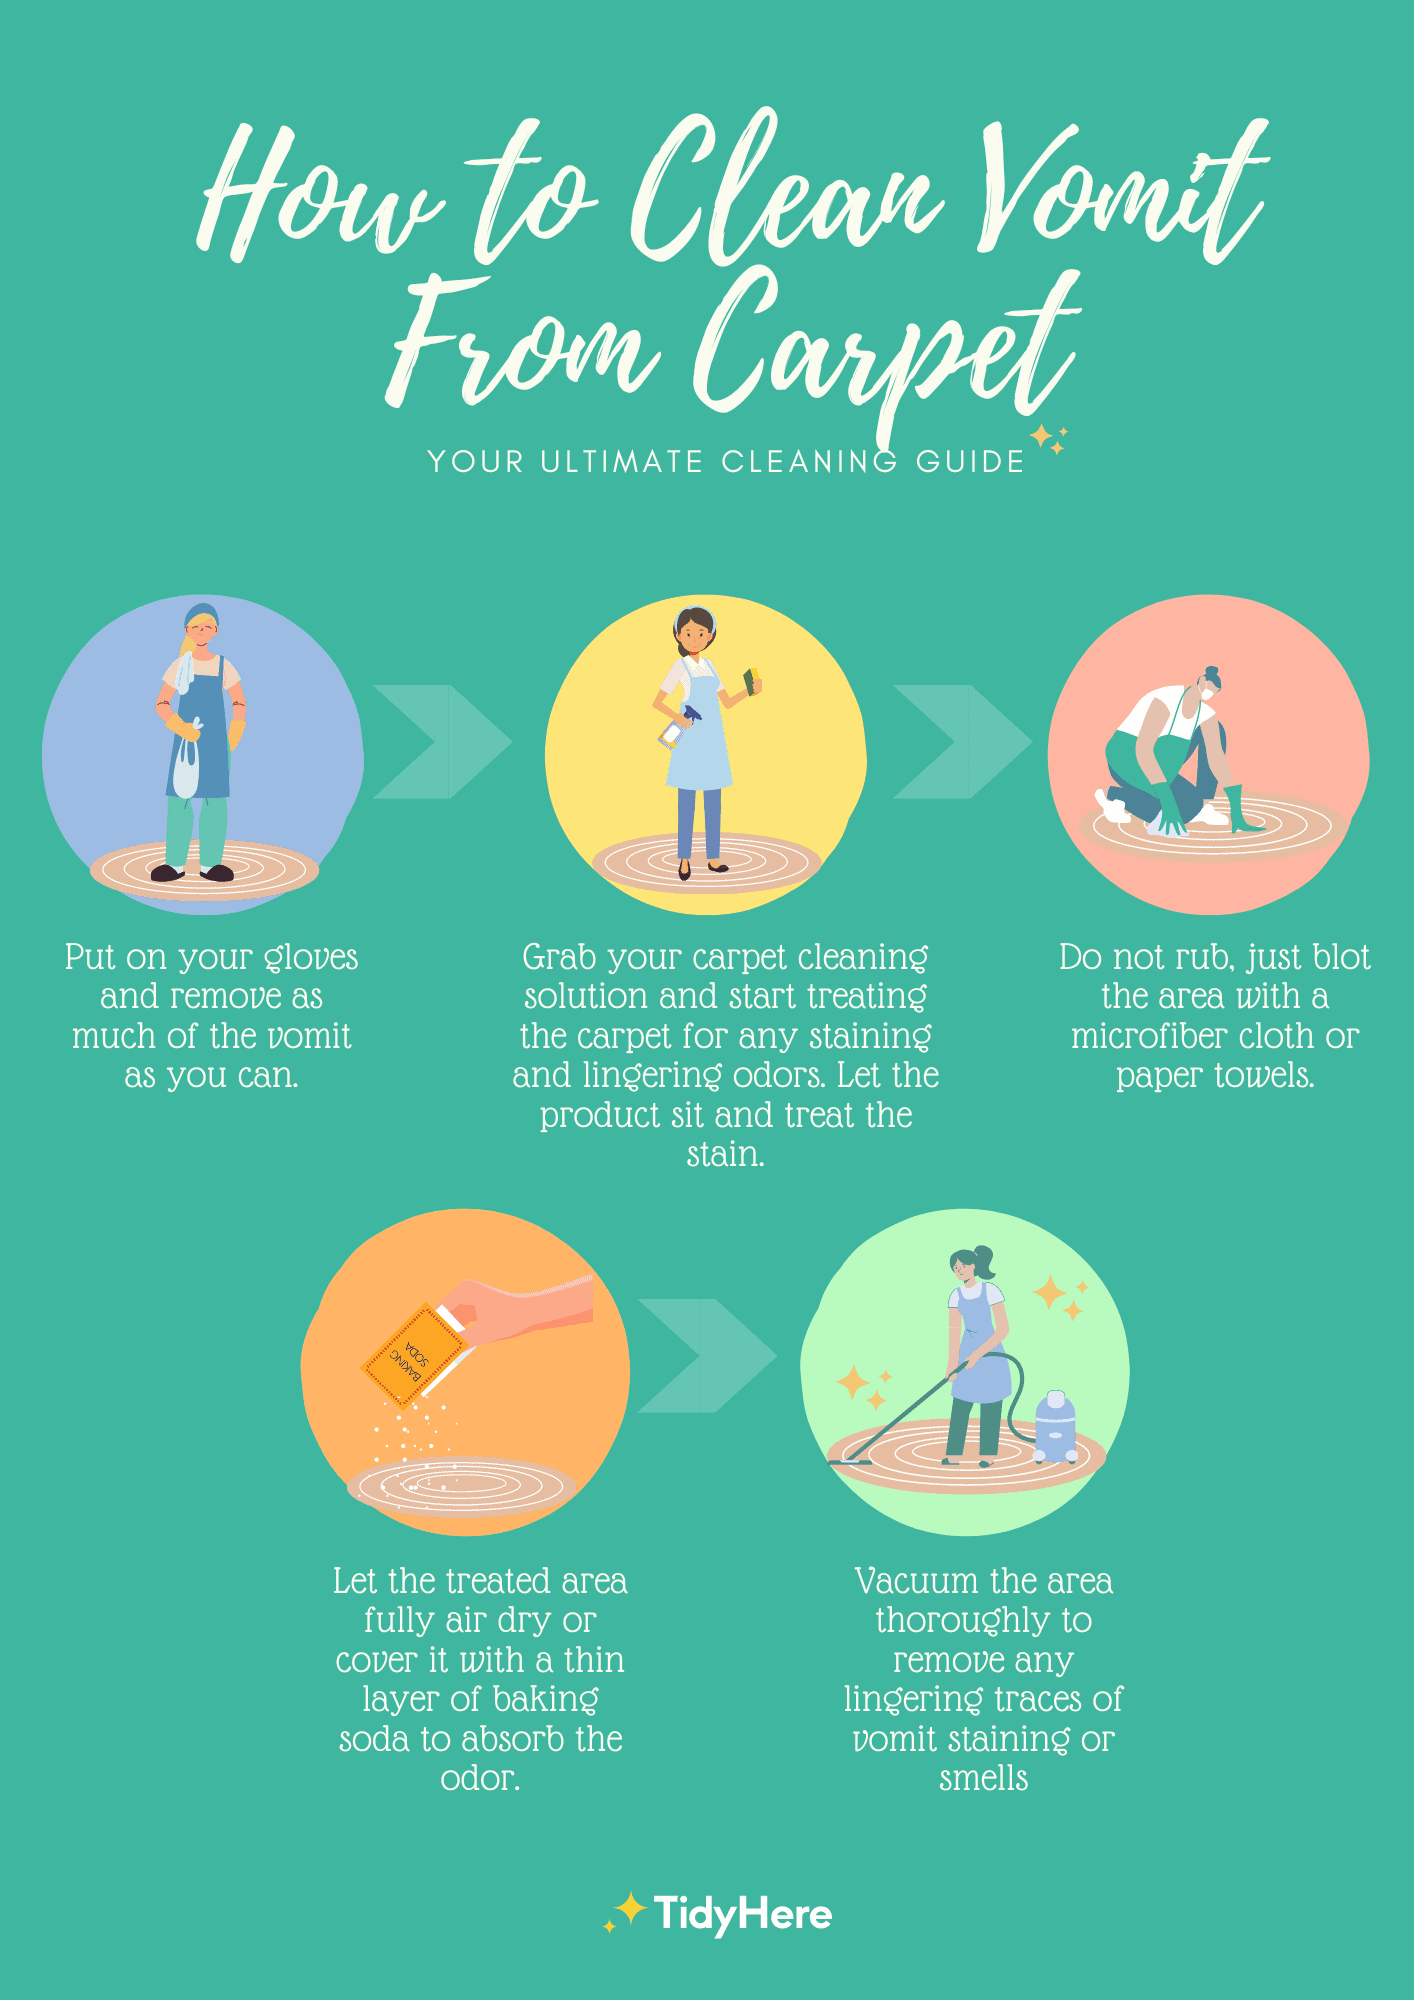 How to Clean Vomit From Your Carpet Tidyhere Infographic